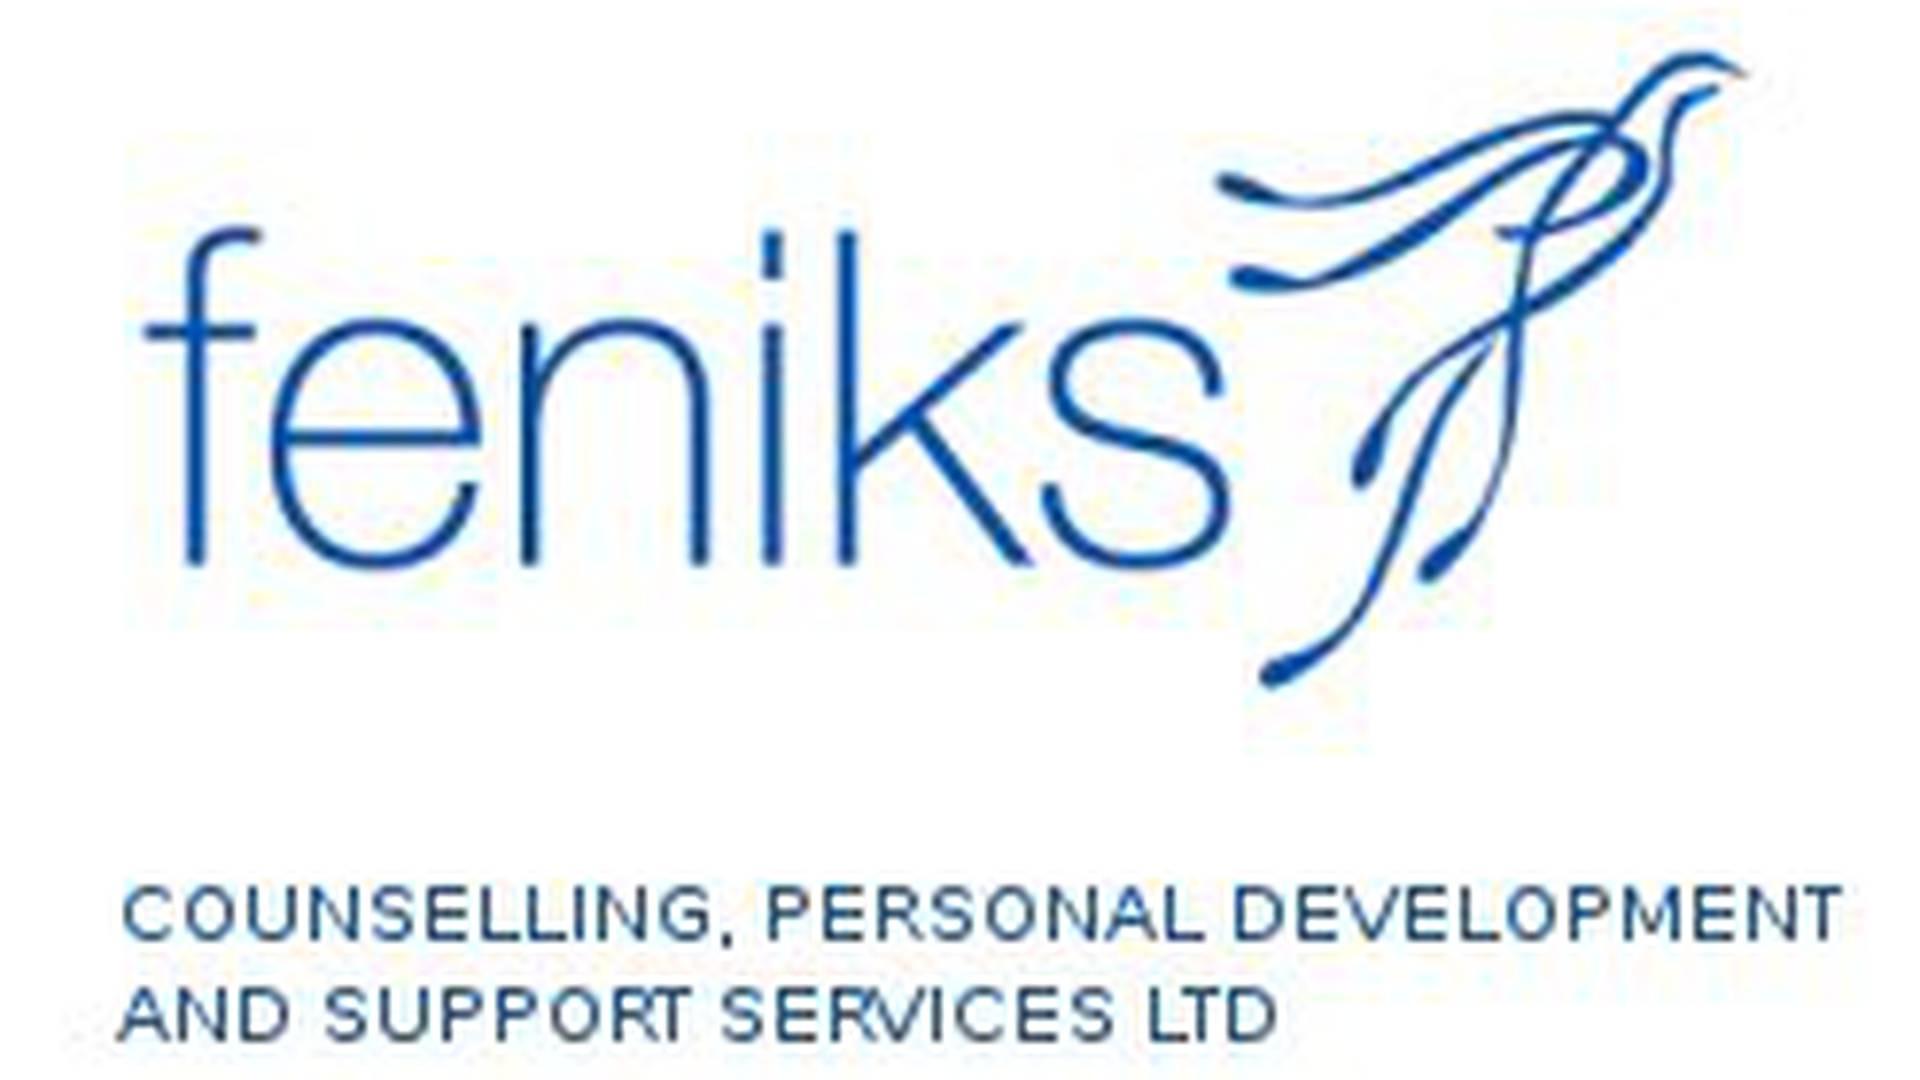 Feniks. Counselling, Personal Development and Support Services LTD photo